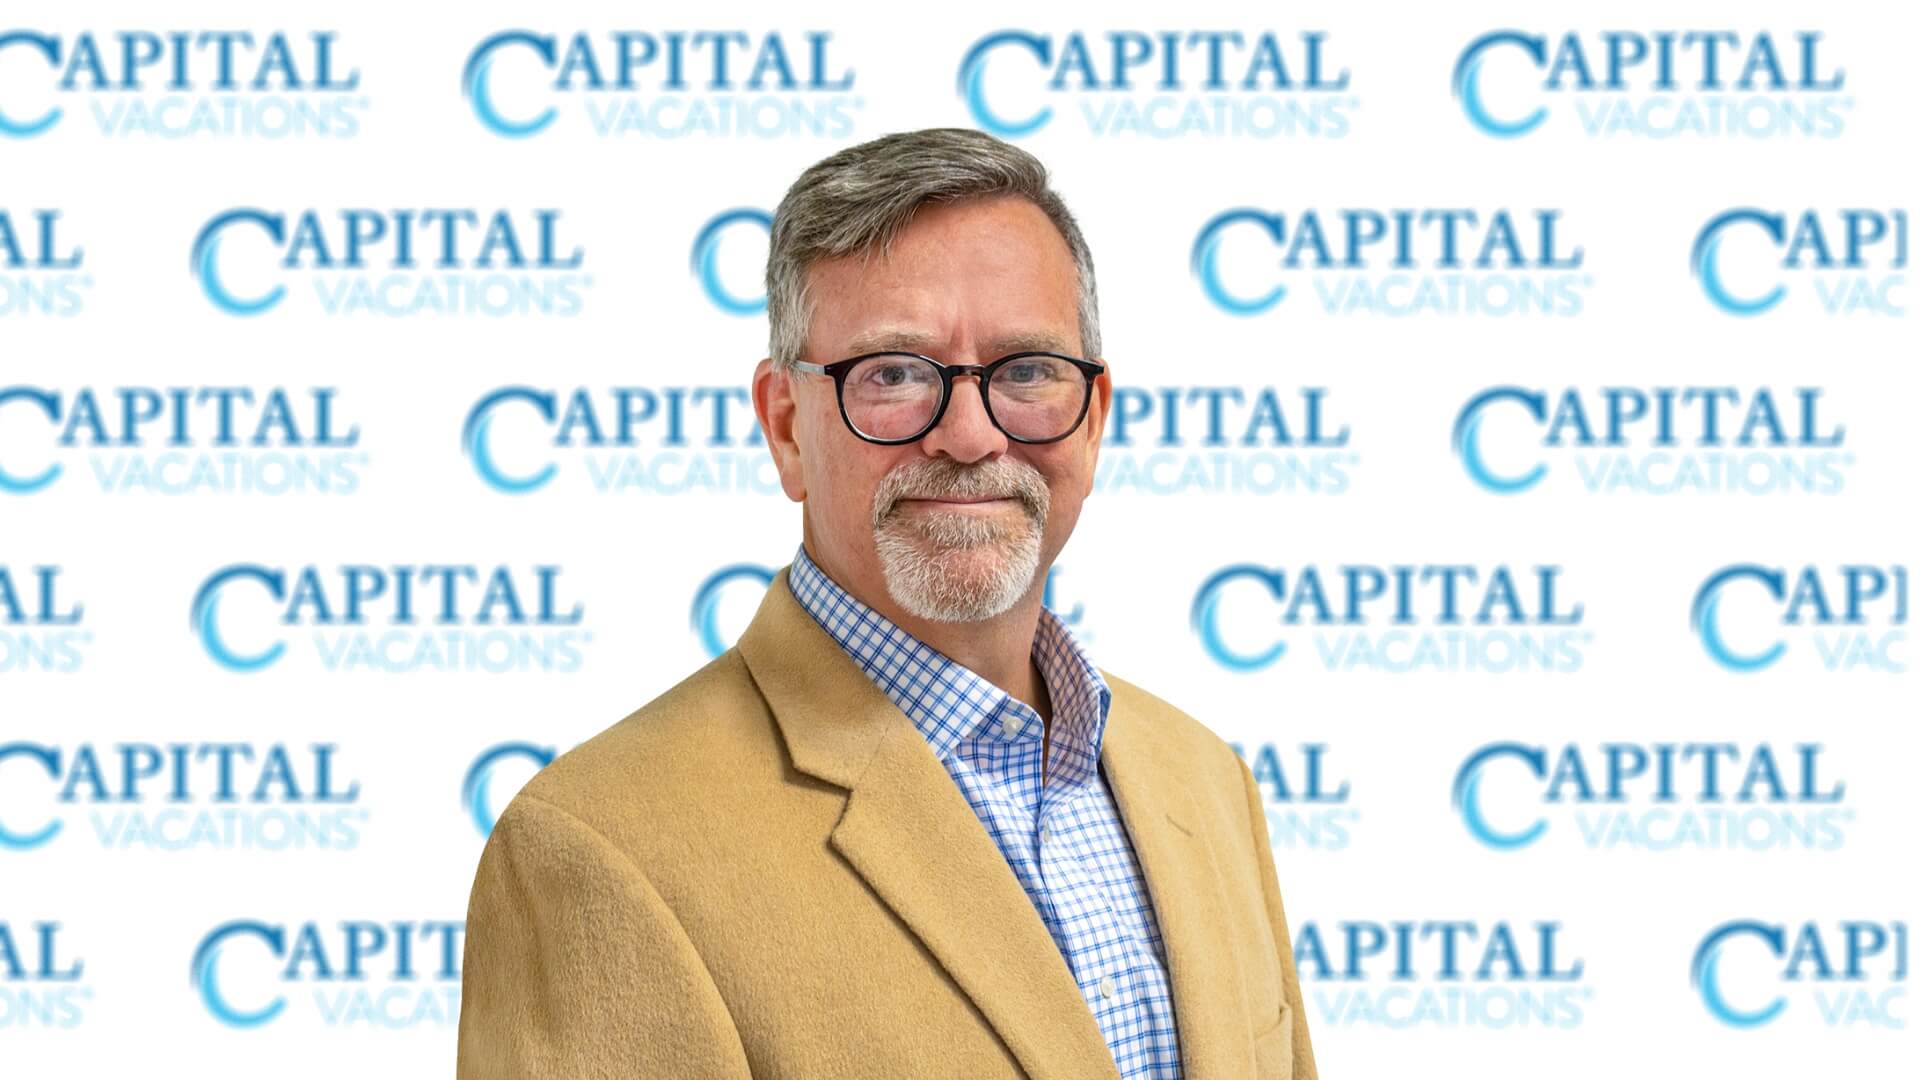 Capital Vacations® Announces New Chief Financial Officer